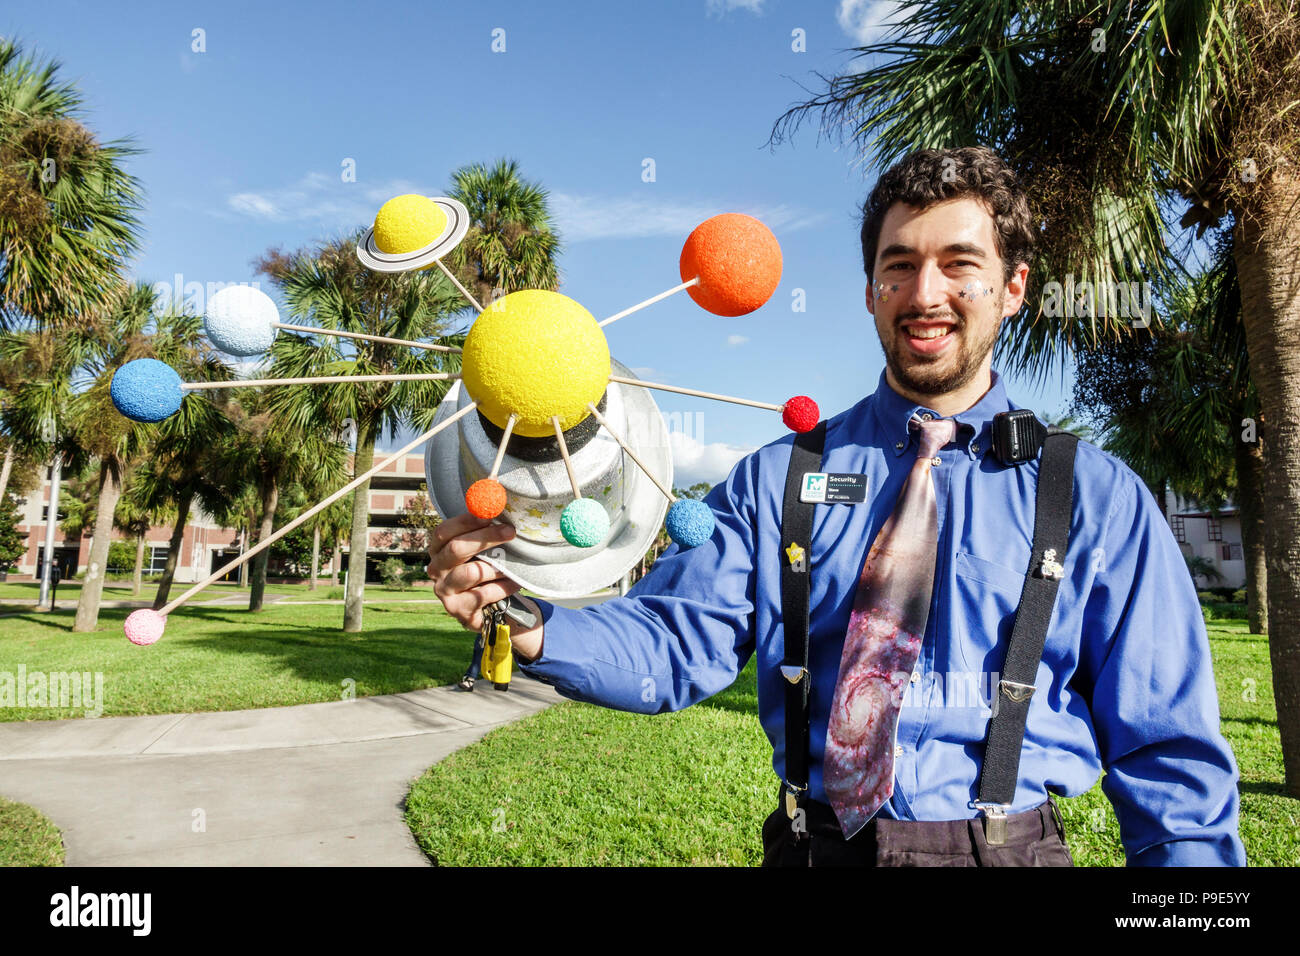 Gainesville Florida,University of Florida Museum of Natural History,man men male,young adult,student students Solar System planets scale model,costume Stock Photo